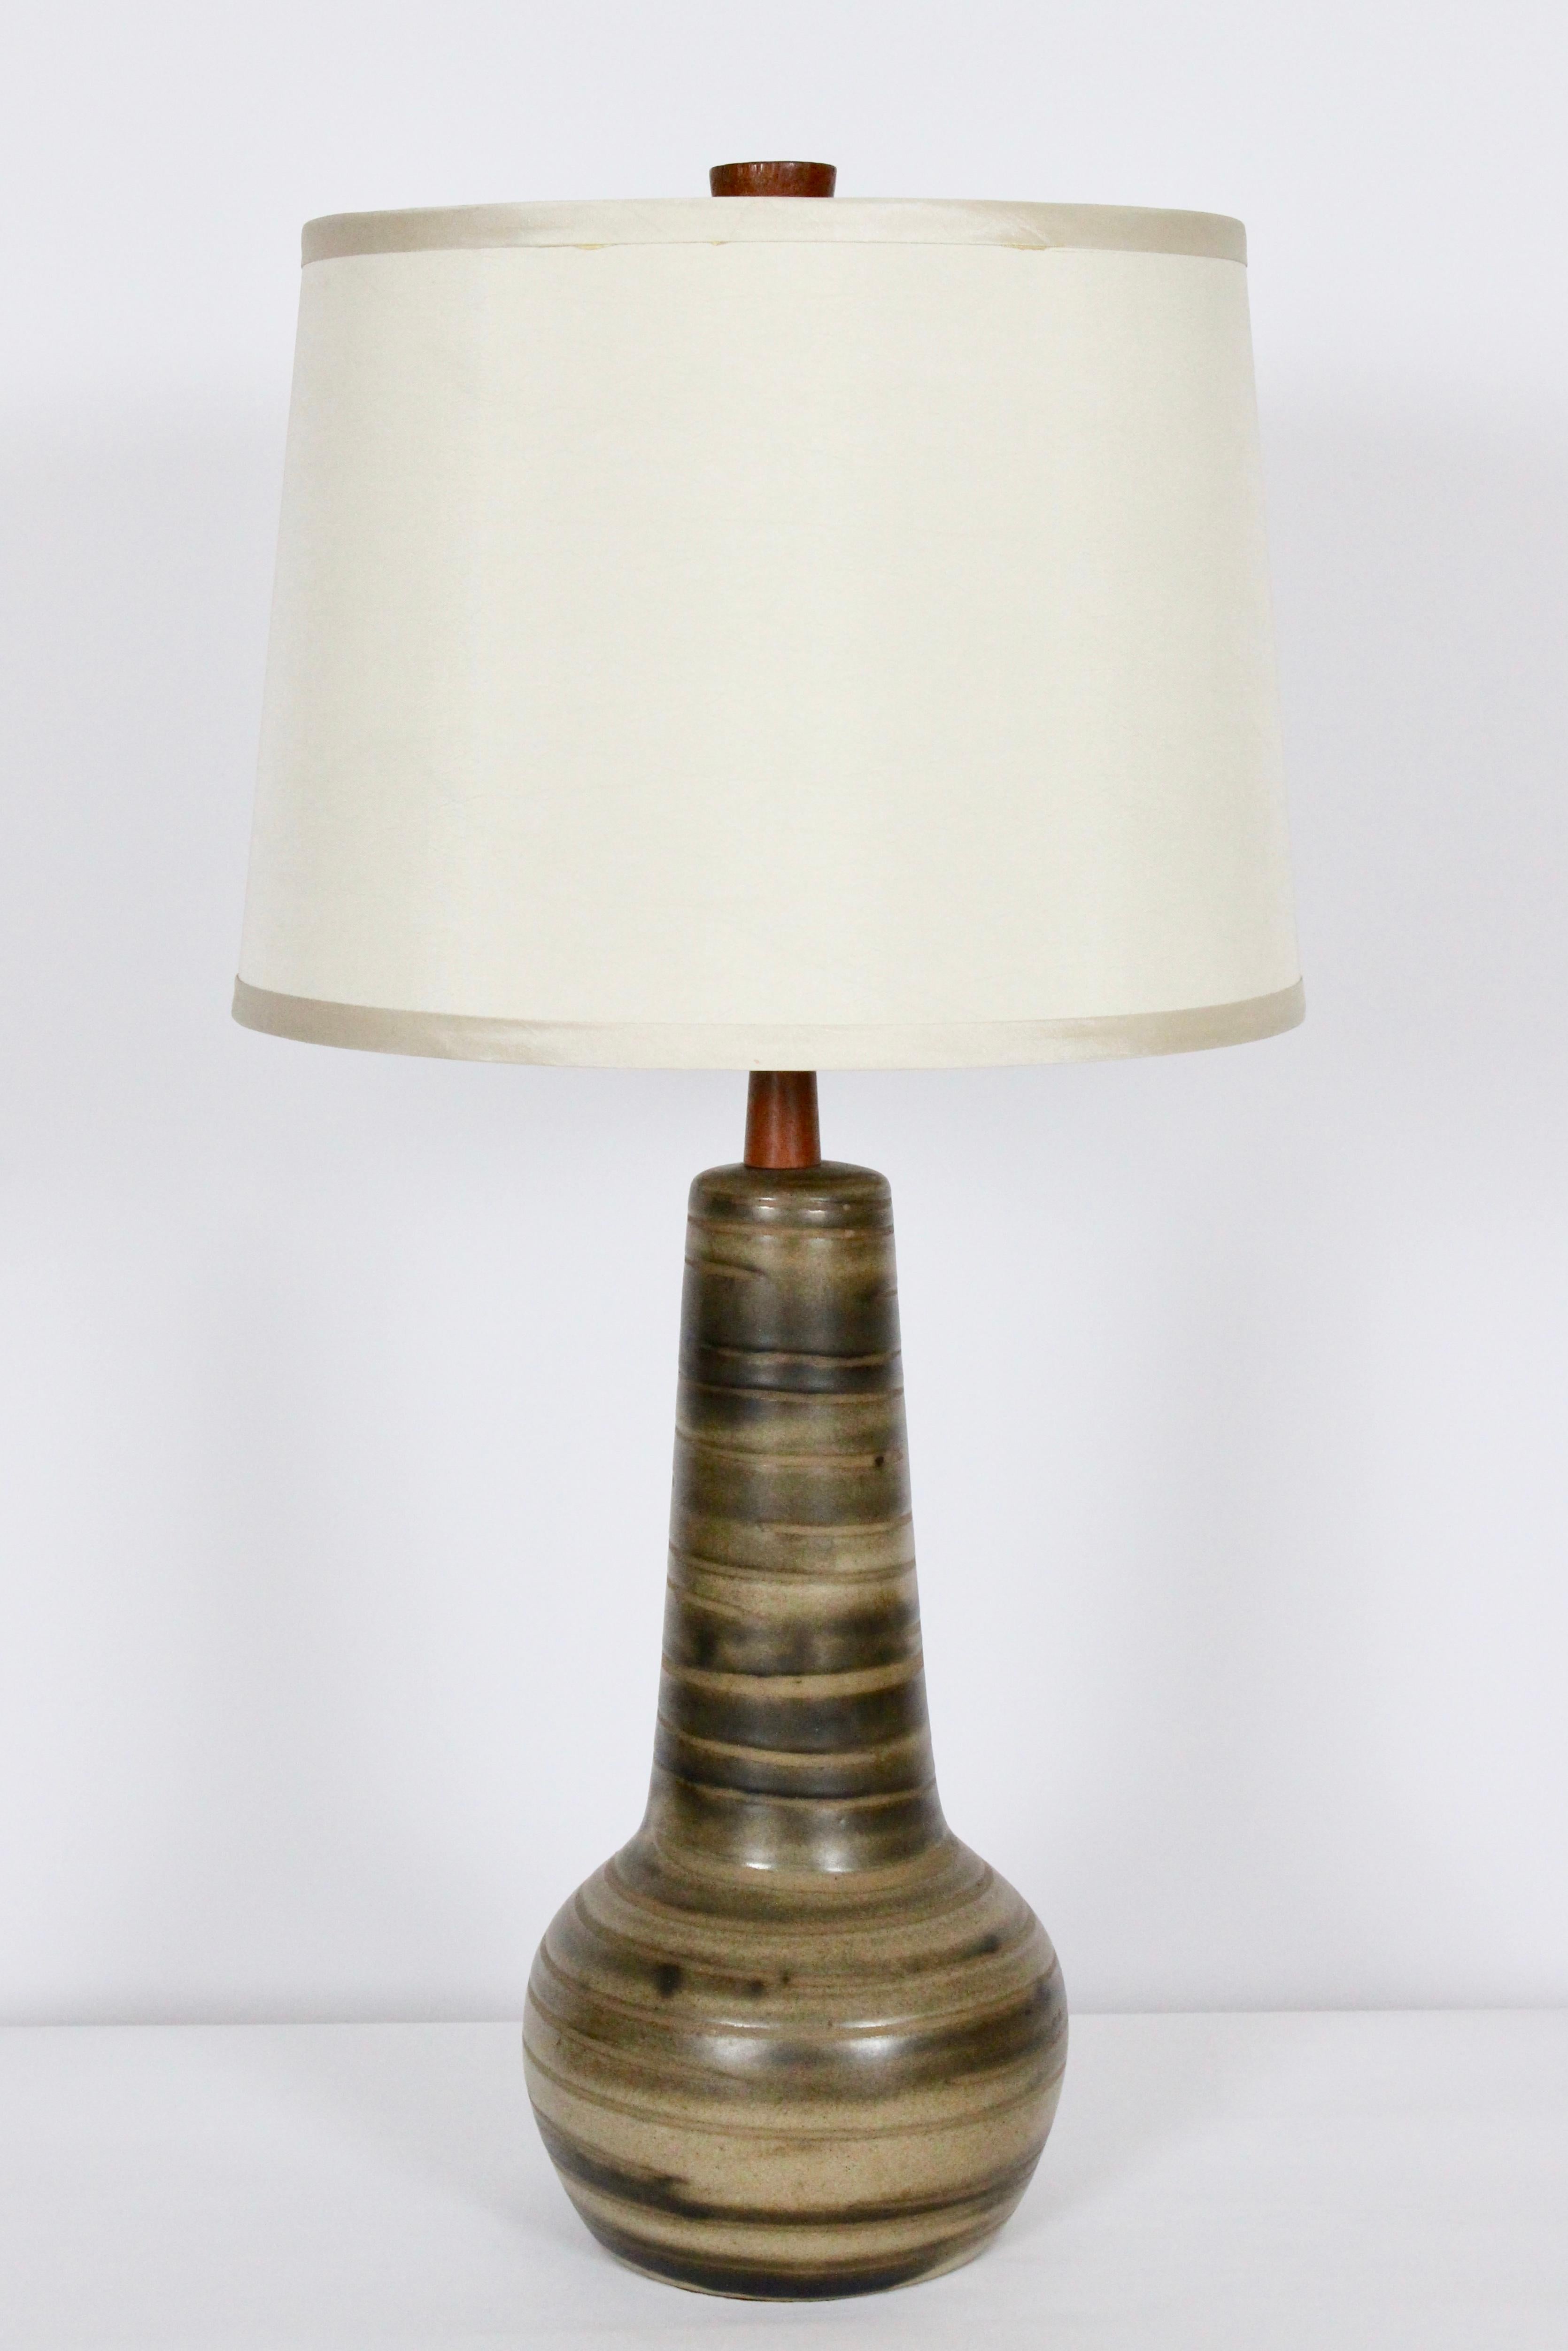 Gordon Martz for Marshall Studios matte glazed stoneware table lamp. Featuring lamp form 178 accentuated with loose banded design. Brown brushed with Dark Beige and shades of Olive Green, with Teak neck and original Teak finial. Shade shown for